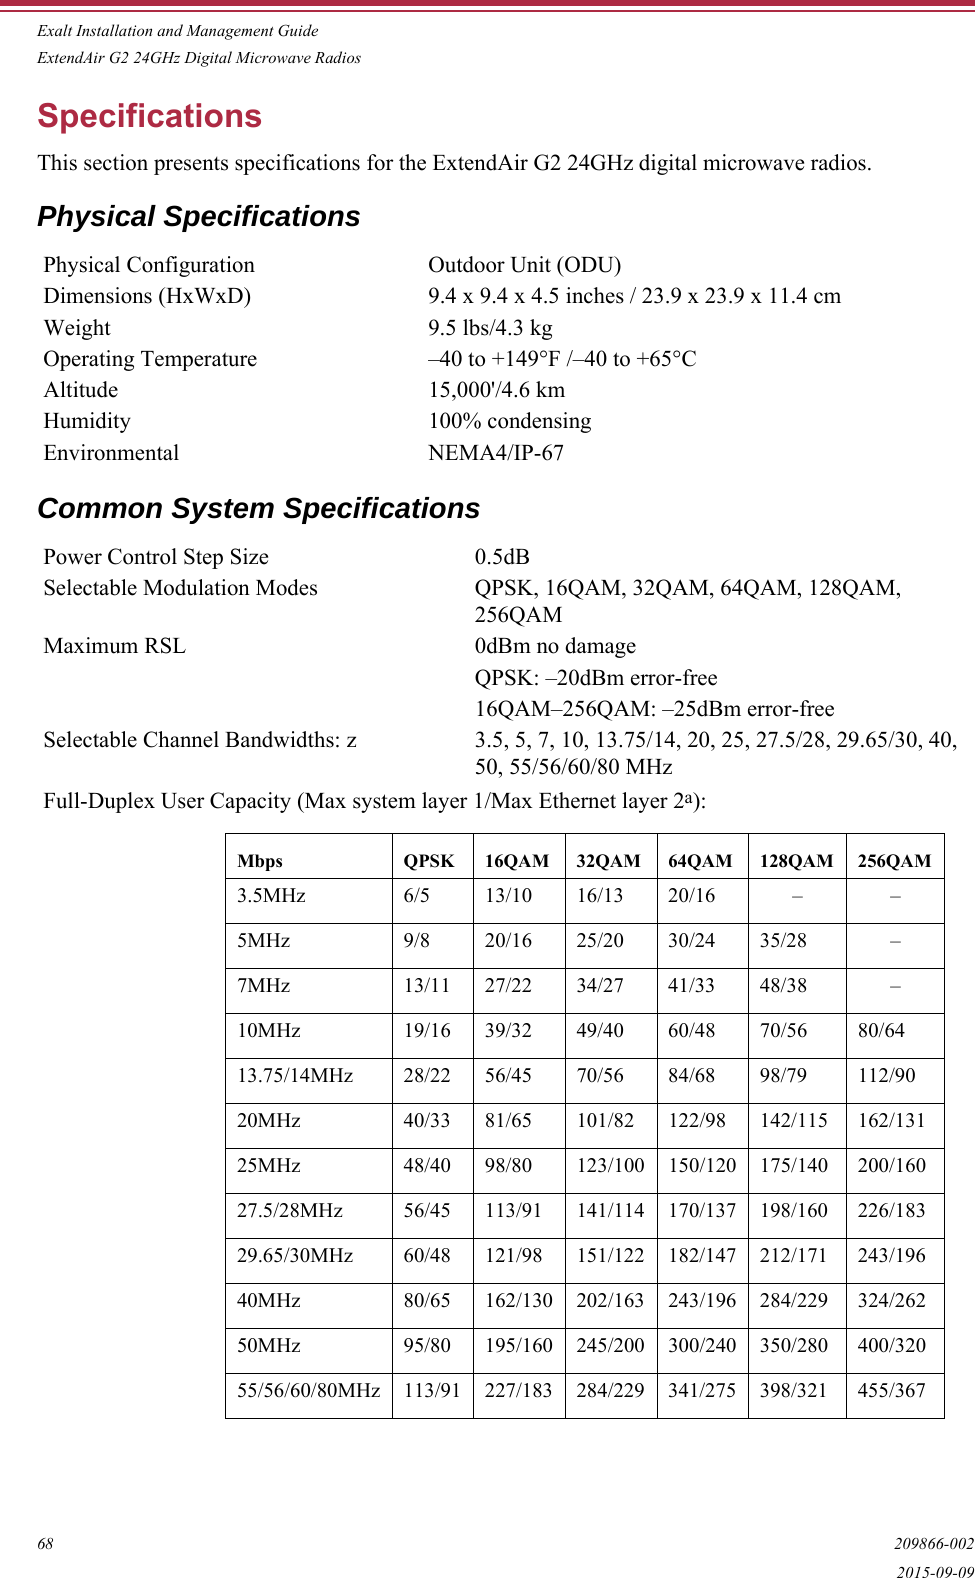 Exalt Installation and Management GuideExtendAir G2 24GHz Digital Microwave Radios68 209866-0022015-09-09SpecificationsThis section presents specifications for the ExtendAir G2 24GHz digital microwave radios.Physical SpecificationsCommon System SpecificationsPhysical Configuration Outdoor Unit (ODU)Dimensions (HxWxD) 9.4 x 9.4 x 4.5 inches / 23.9 x 23.9 x 11.4 cmWeight 9.5 lbs/4.3 kgOperating Temperature –40 to +149°F /–40 to +65°CAltitude 15,000&apos;/4.6 km Humidity 100% condensingEnvironmental NEMA4/IP-67Power Control Step Size 0.5dBSelectable Modulation Modes QPSK, 16QAM, 32QAM, 64QAM, 128QAM, 256QAMMaximum RSL 0dBm no damageQPSK: –20dBm error-free16QAM–256QAM: –25dBm error-freeSelectable Channel Bandwidths: z 3.5, 5, 7, 10, 13.75/14, 20, 25, 27.5/28, 29.65/30, 40, 50, 55/56/60/80 MHzFull-Duplex User Capacity (Max system layer 1/Max Ethernet layer 2a):Mbps QPSK 16QAM 32QAM 64QAM 128QAM 256QAM3.5MHz 6/5 13/10 16/13 20/16 – –5MHz 9/8 20/16 25/20 30/24 35/28 –7MHz 13/11 27/22 34/27 41/33 48/38 –10MHz 19/16 39/32 49/40 60/48 70/56 80/6413.75/14MHz 28/22 56/45 70/56 84/68 98/79 112/9020MHz 40/33 81/65 101/82 122/98 142/115 162/13125MHz 48/40 98/80 123/100 150/120 175/140 200/16027.5/28MHz 56/45 113/91 141/114 170/137 198/160 226/18329.65/30MHz 60/48 121/98 151/122 182/147 212/171 243/19640MHz 80/65 162/130 202/163 243/196 284/229 324/26250MHz 95/80 195/160 245/200 300/240 350/280 400/32055/56/60/80MHz 113/91 227/183 284/229 341/275 398/321 455/367